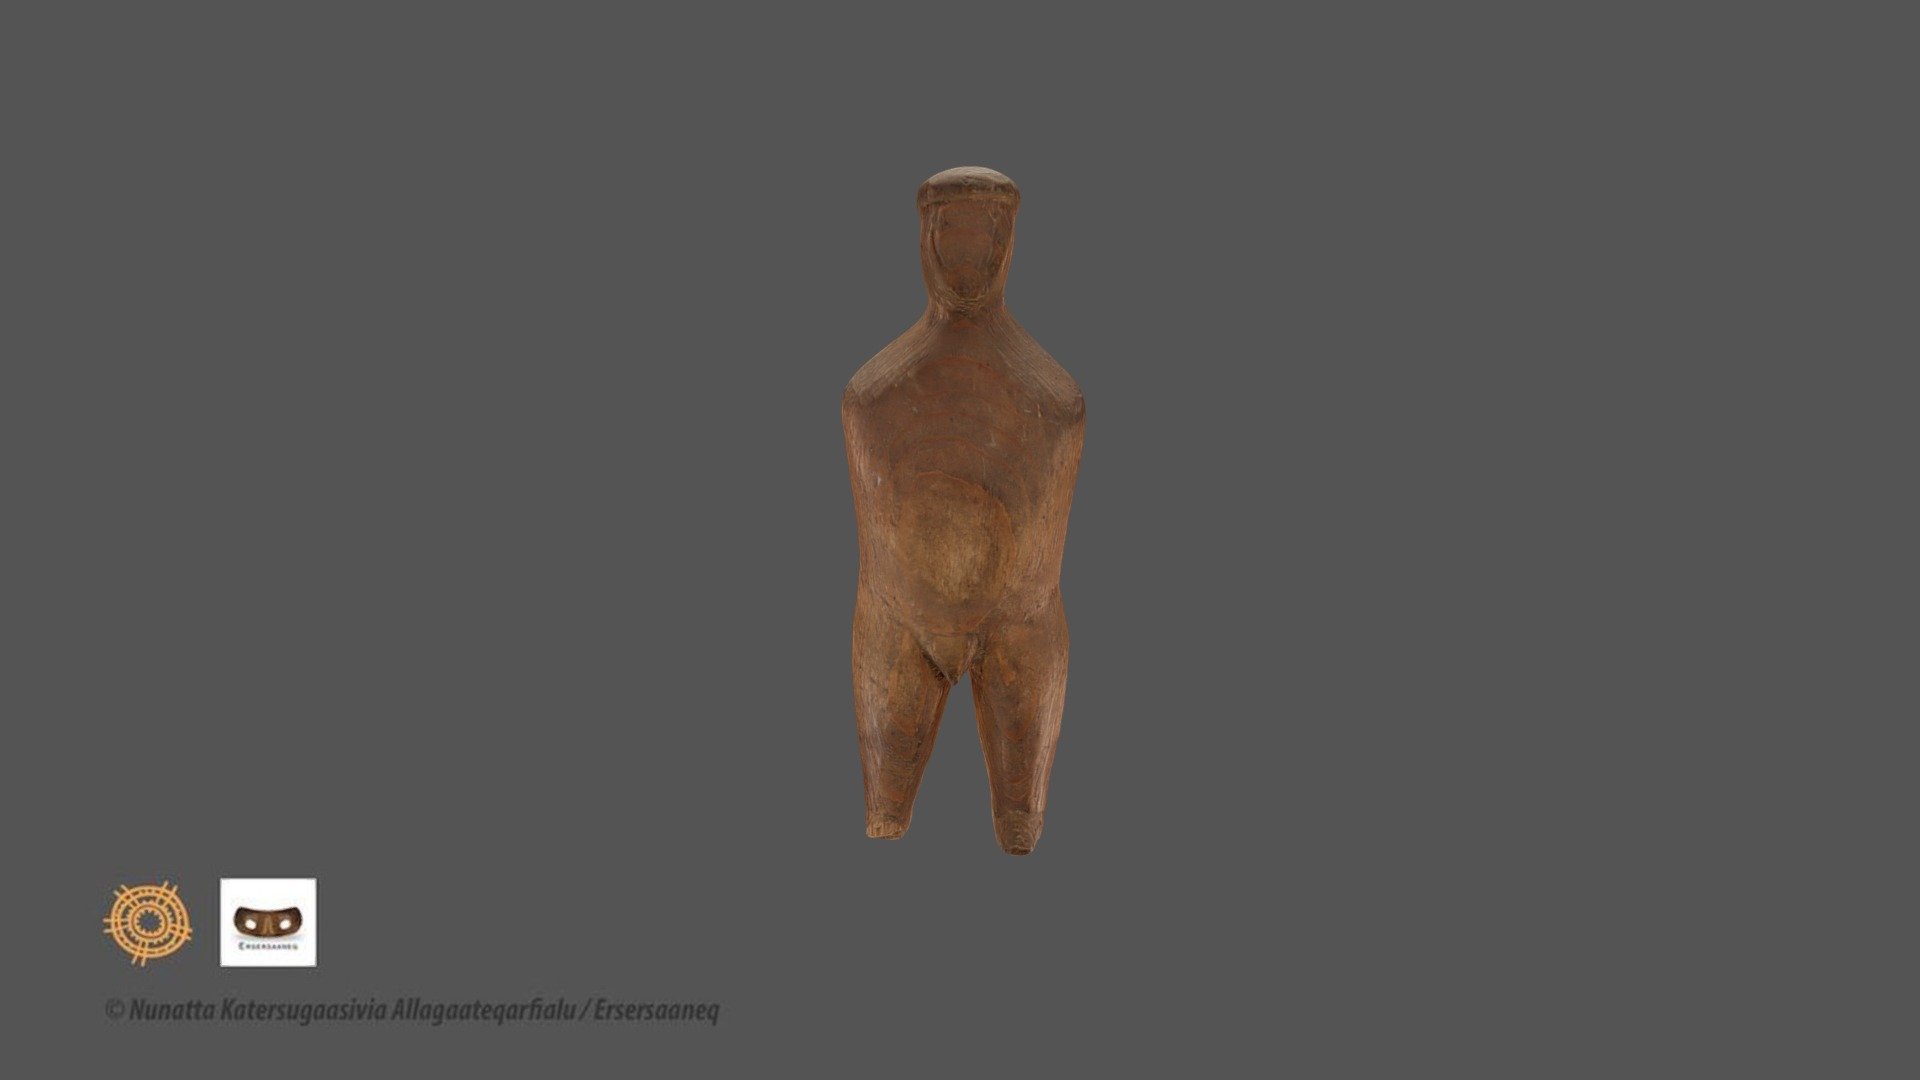 Figurine from East Greenland (Man)